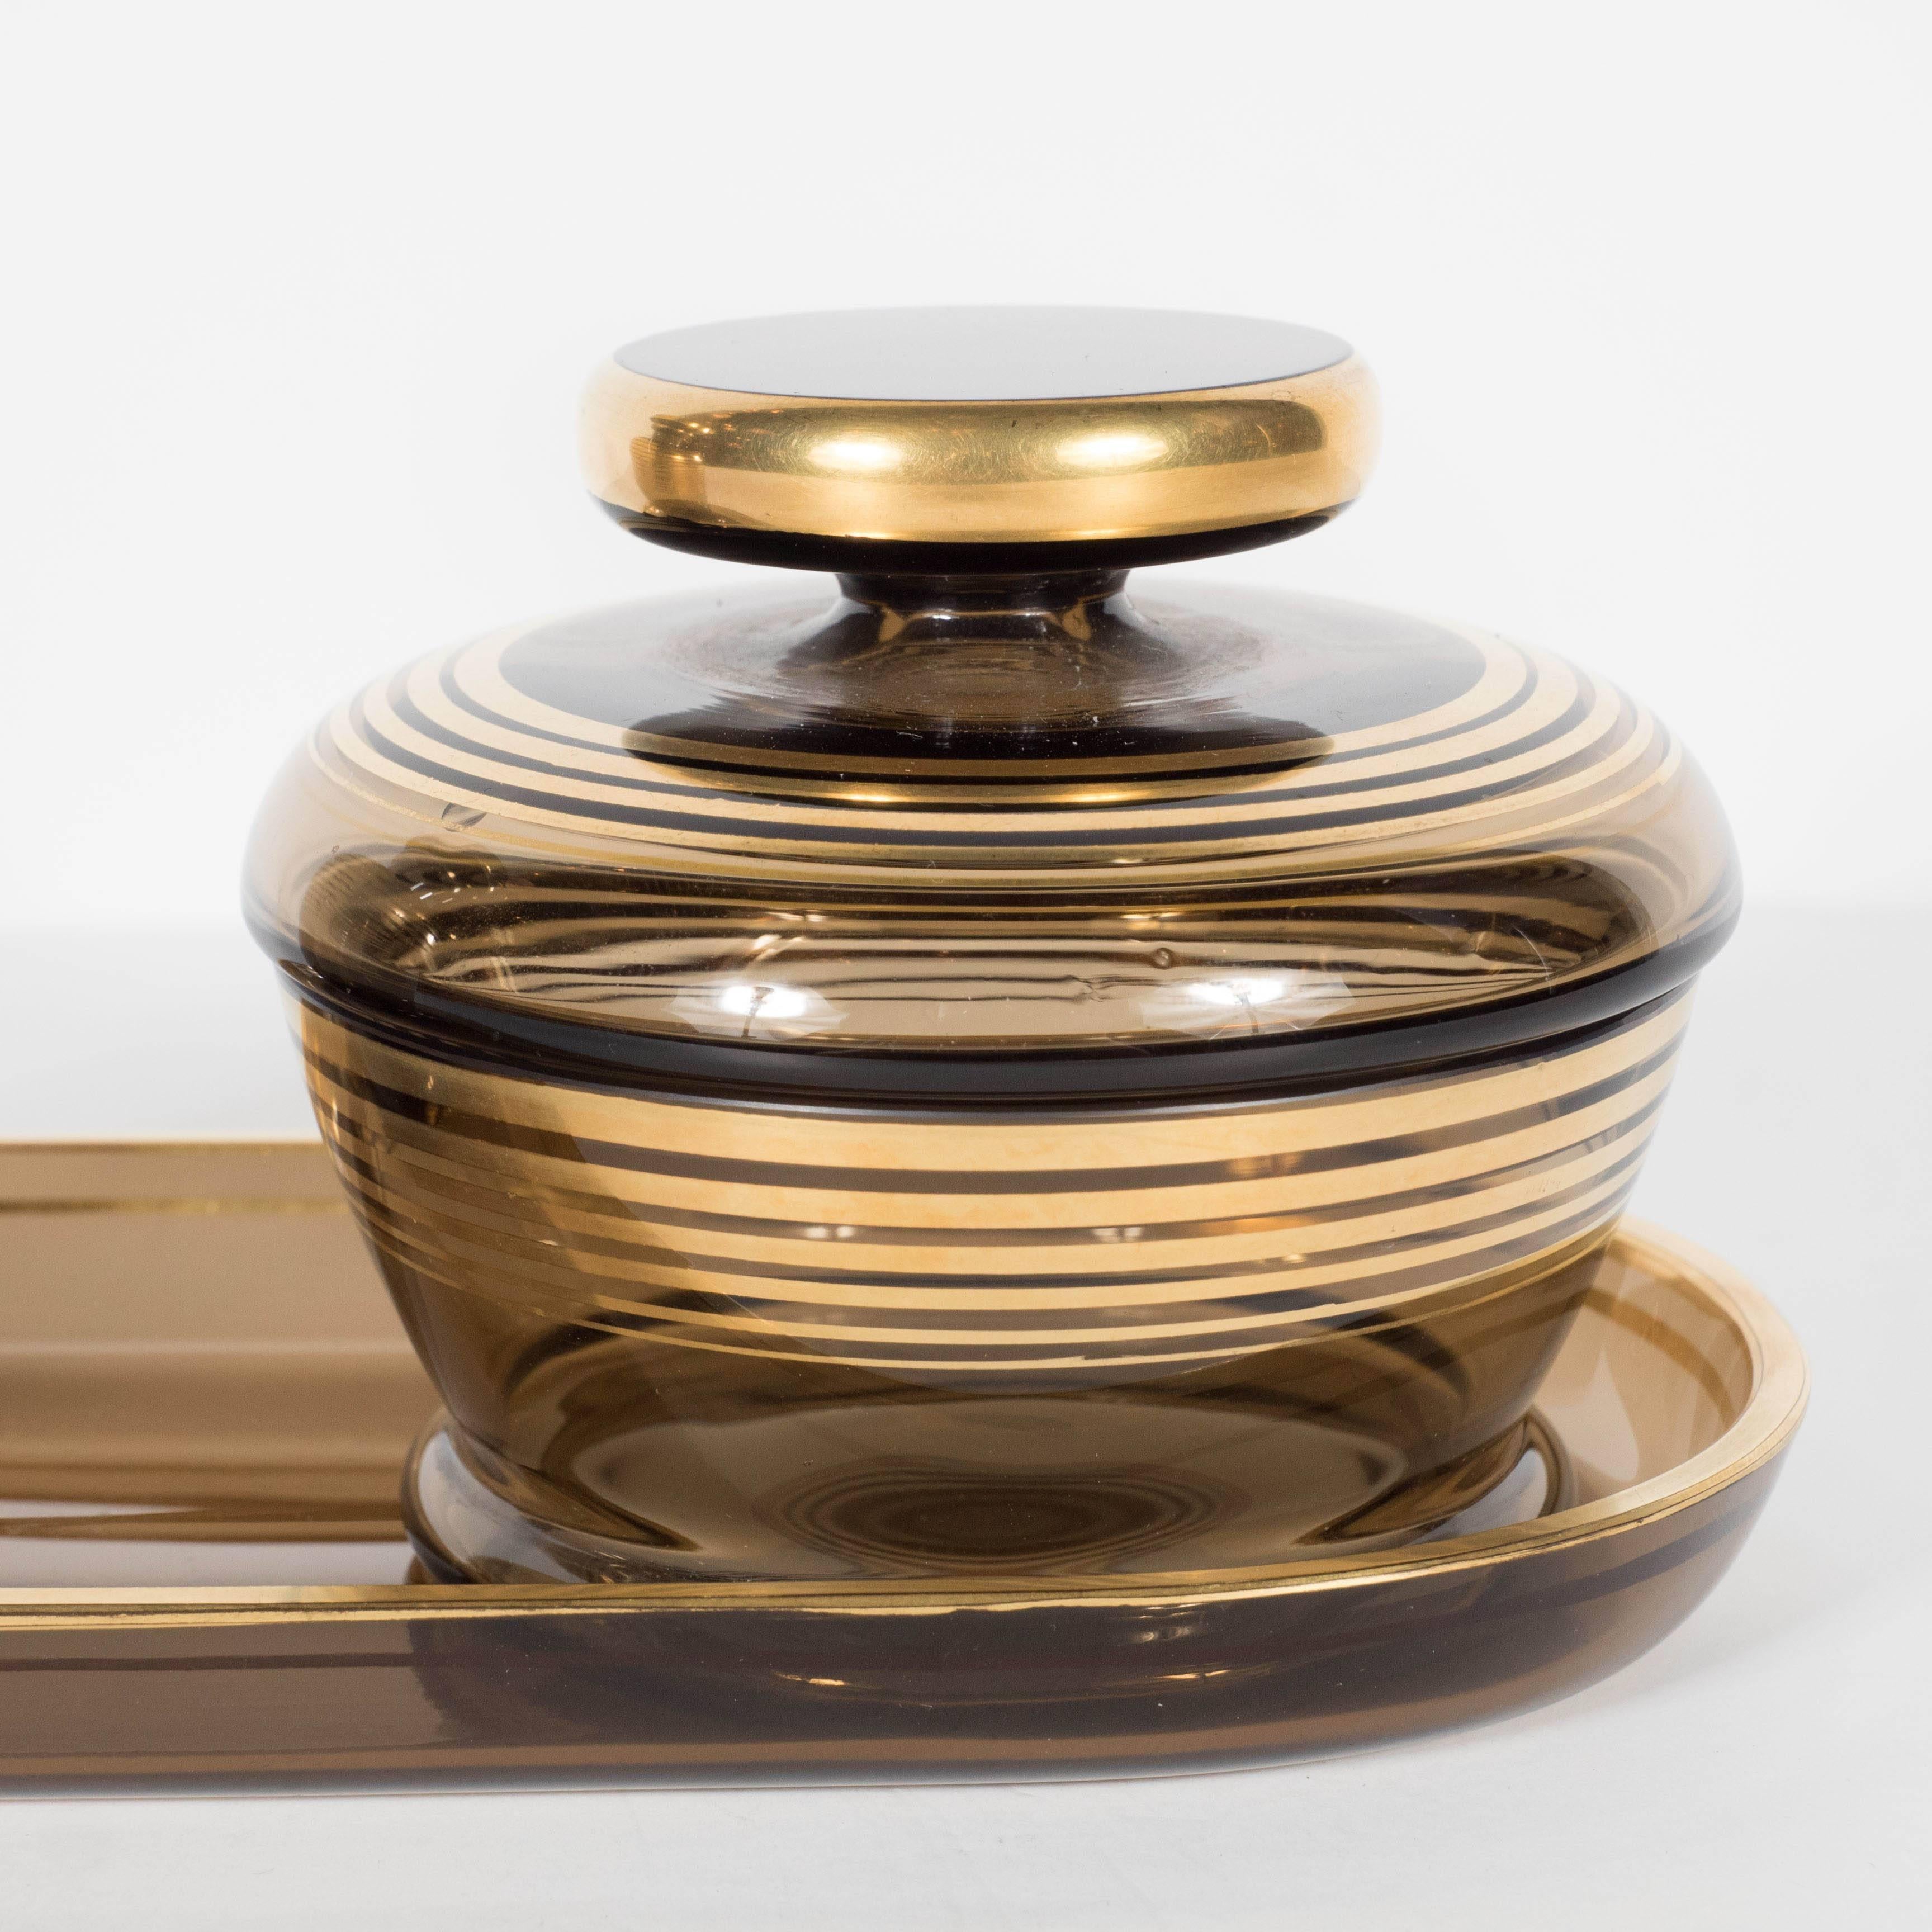 This stunning Art Deco dresser set features a tray, perfume bottle and covered box. Each of these pieces feature a streamlined 24-carat gold overlay lineal design of concentric rings. This is a wonderful example of the Art Deco period. It is in